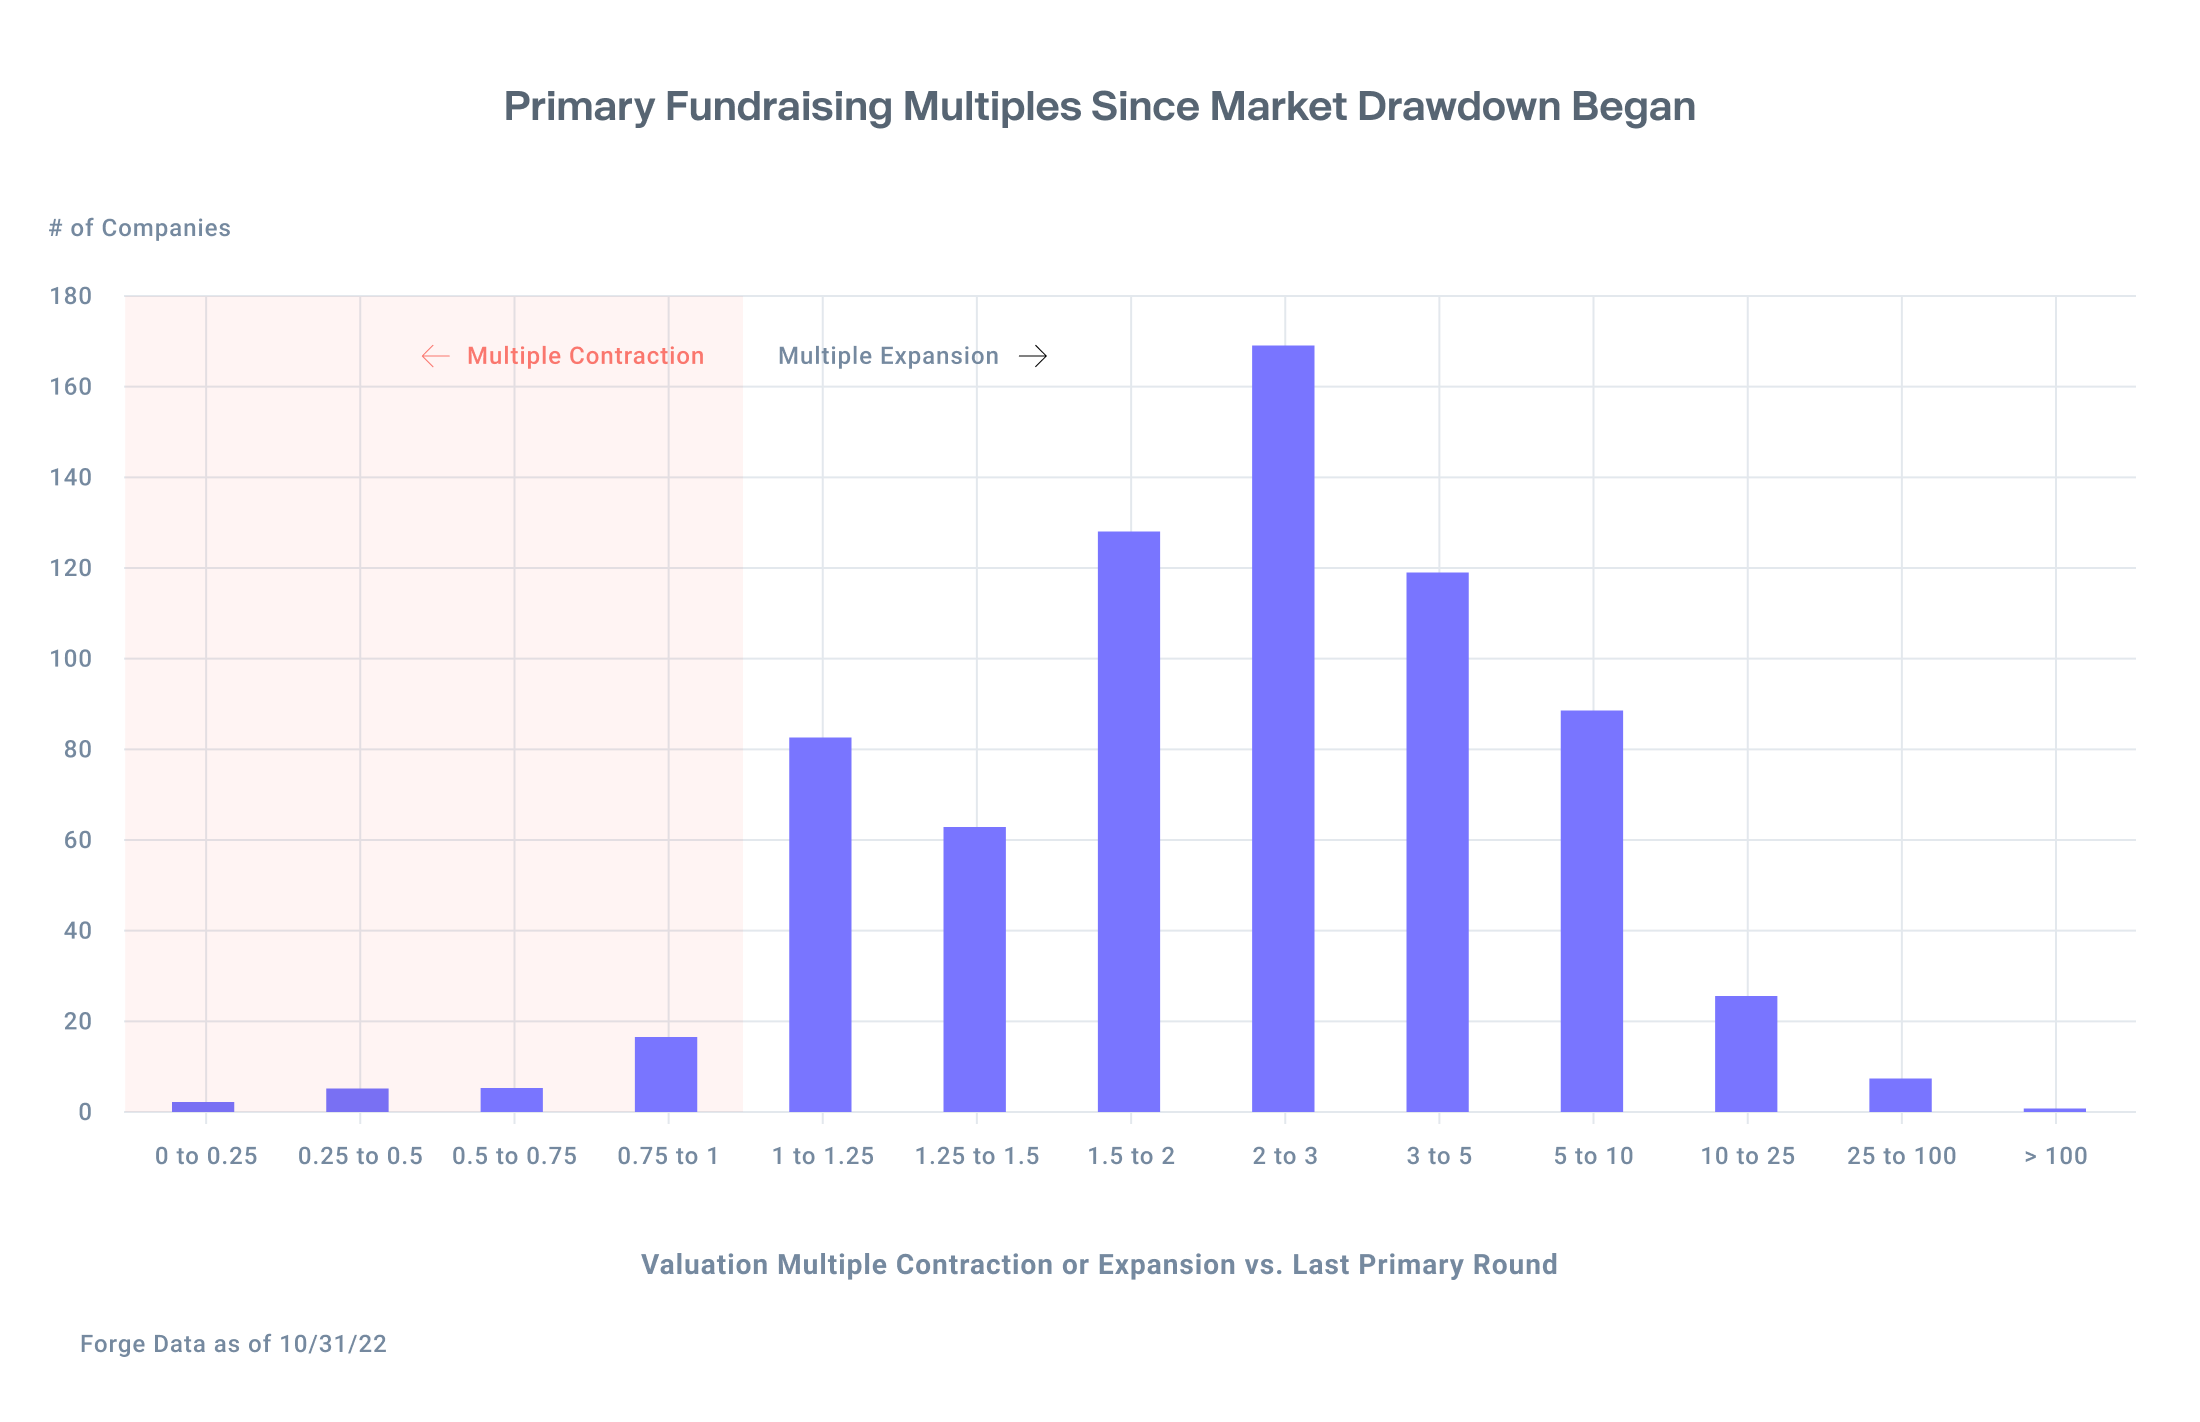 Bar chart showing primary fundraising multiples with over 160 private companies with a 2 to 3 multiple according to Forge Data